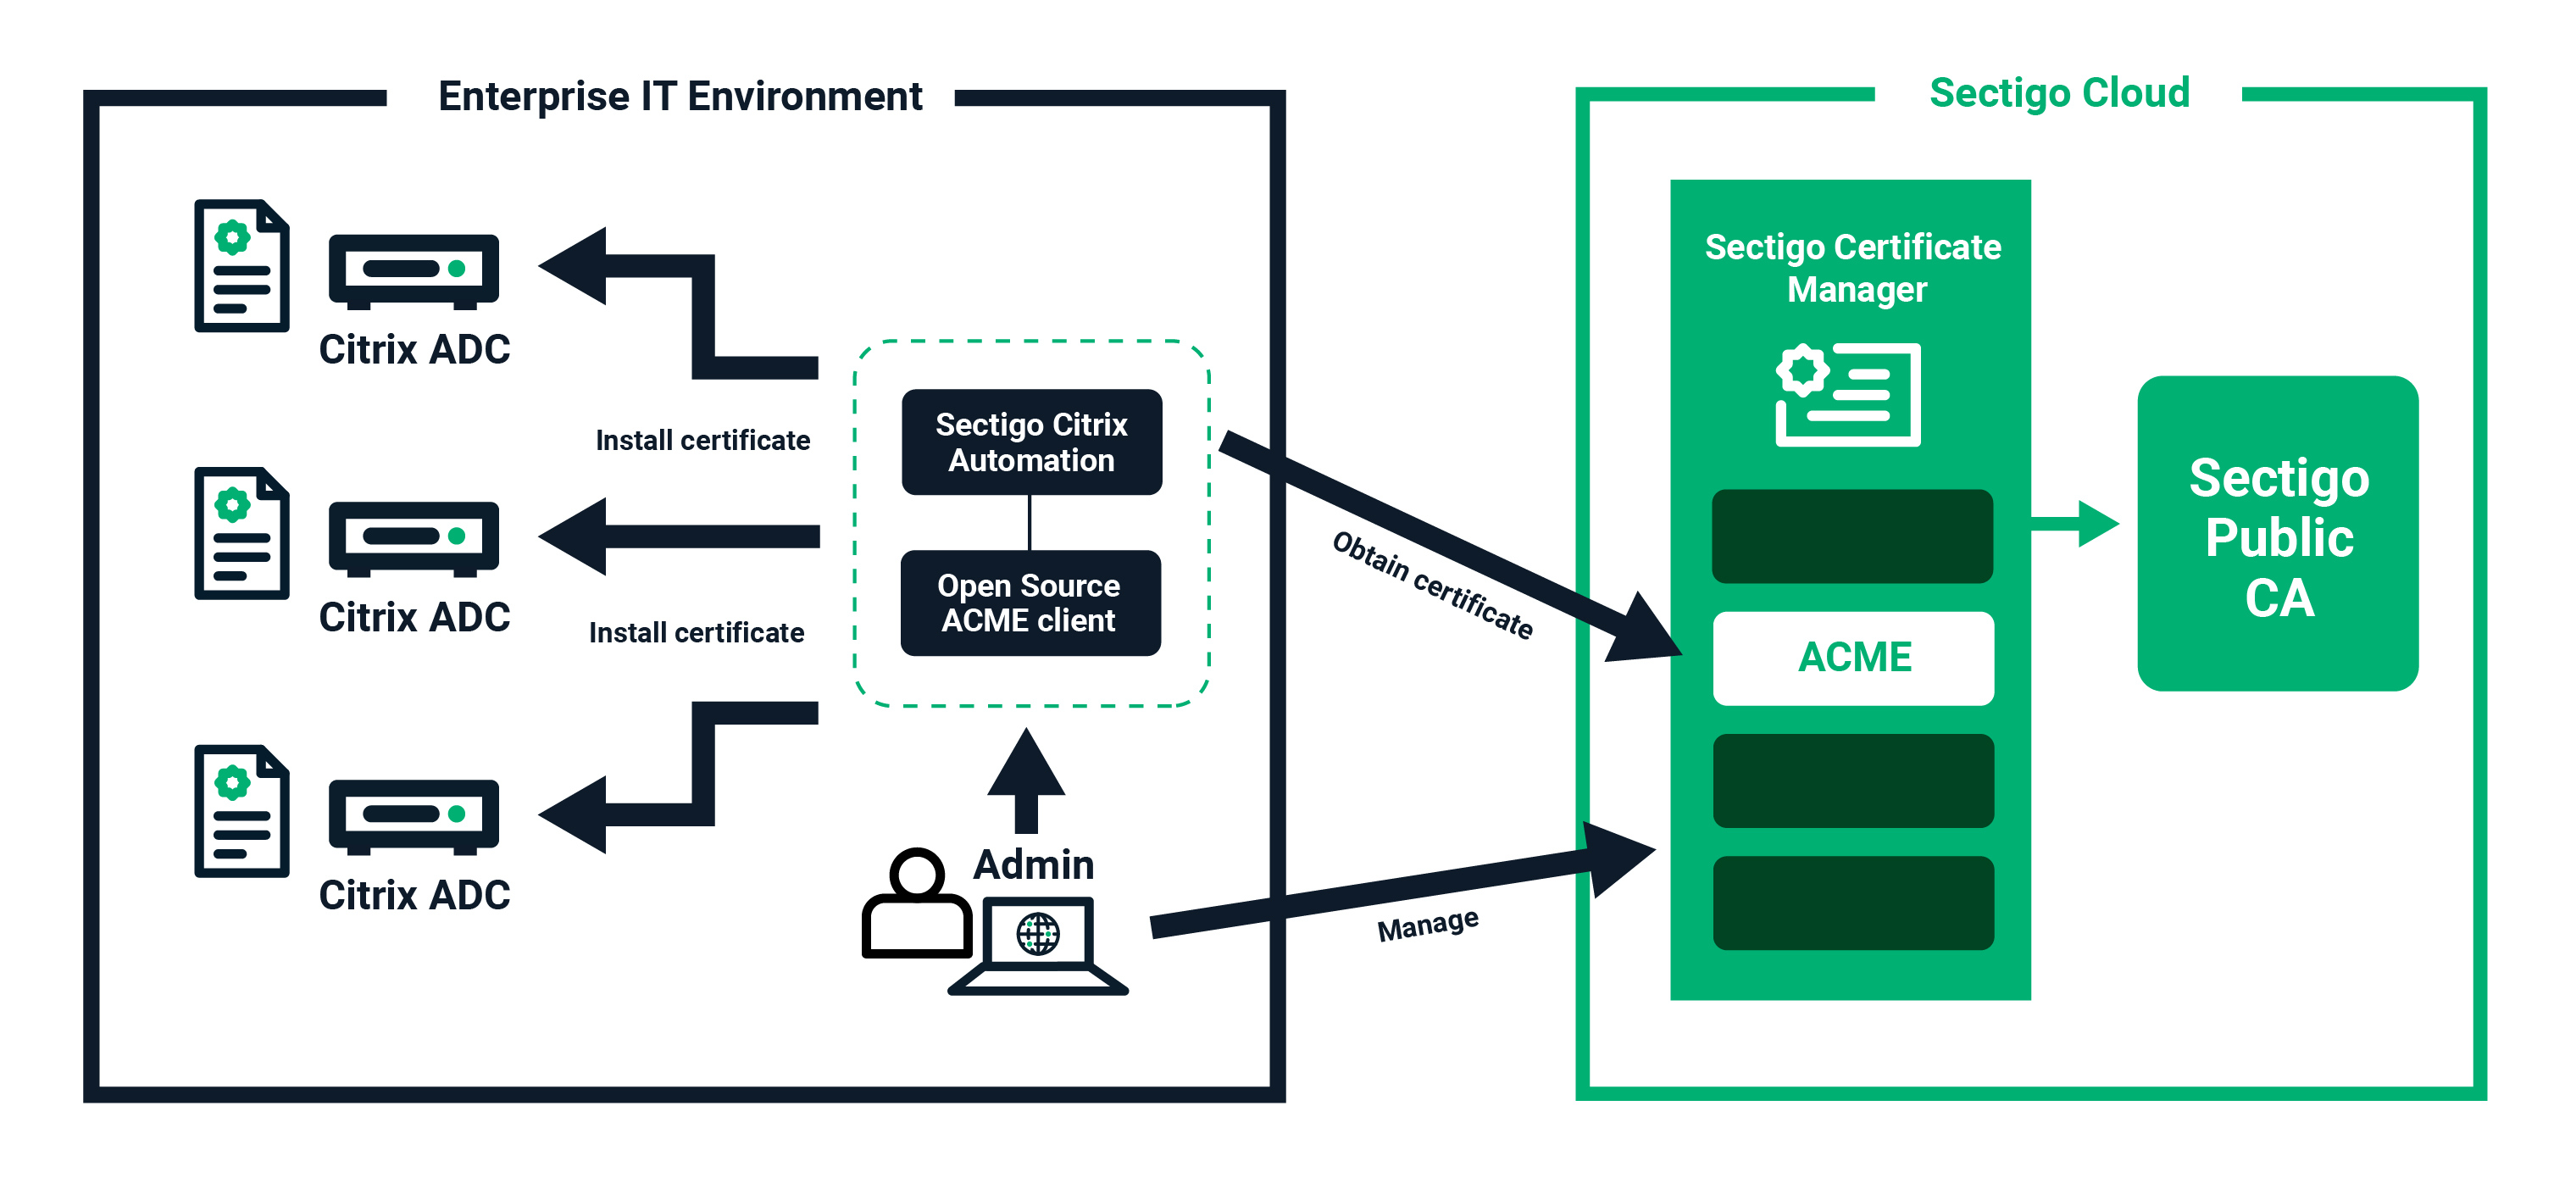 Enable Certificate Management Automation For Citrix Adc With Sectigo